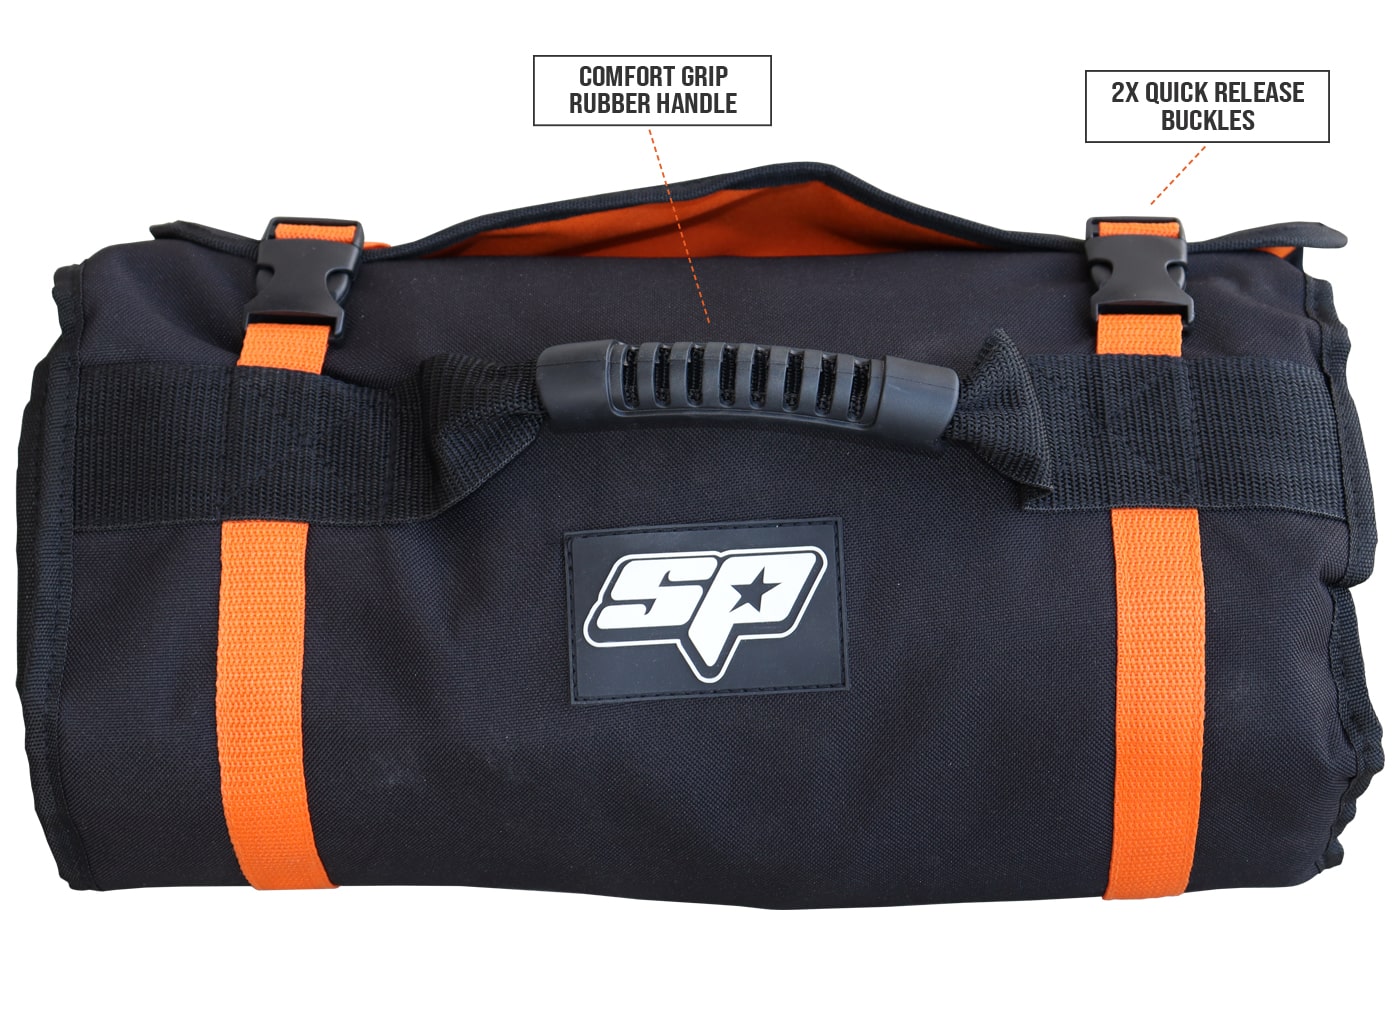 Tool Roll Kit Heavy Duty 90Pce - SP51280 by SP Tools